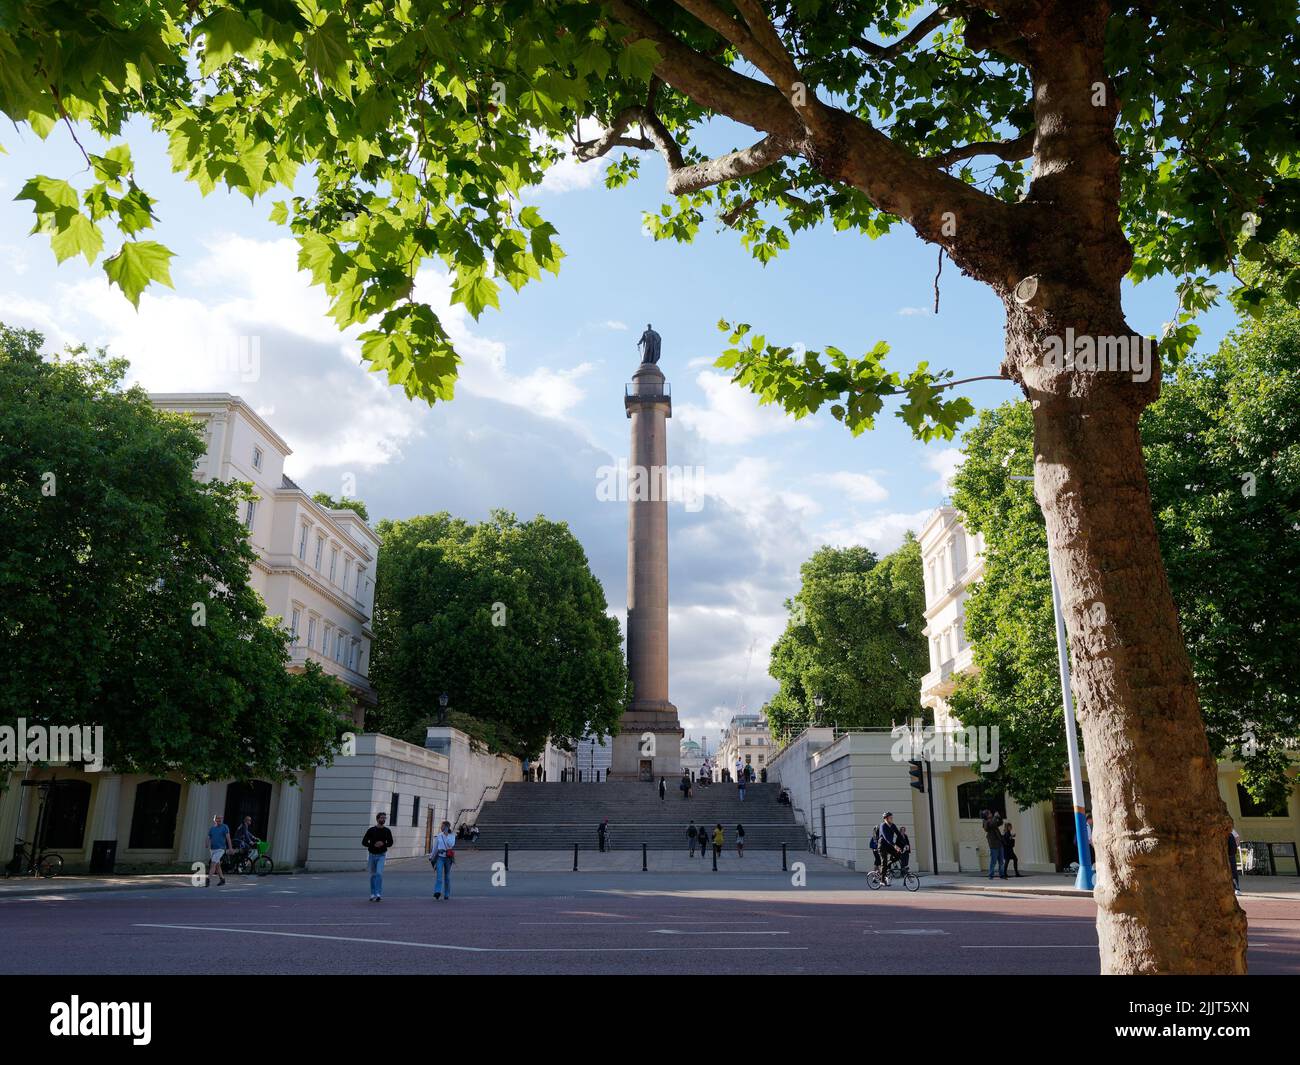 London, Greater London, England, June 30 2022: Duke of York column in Waterloo PLace as seen from The Mall Stock Photo